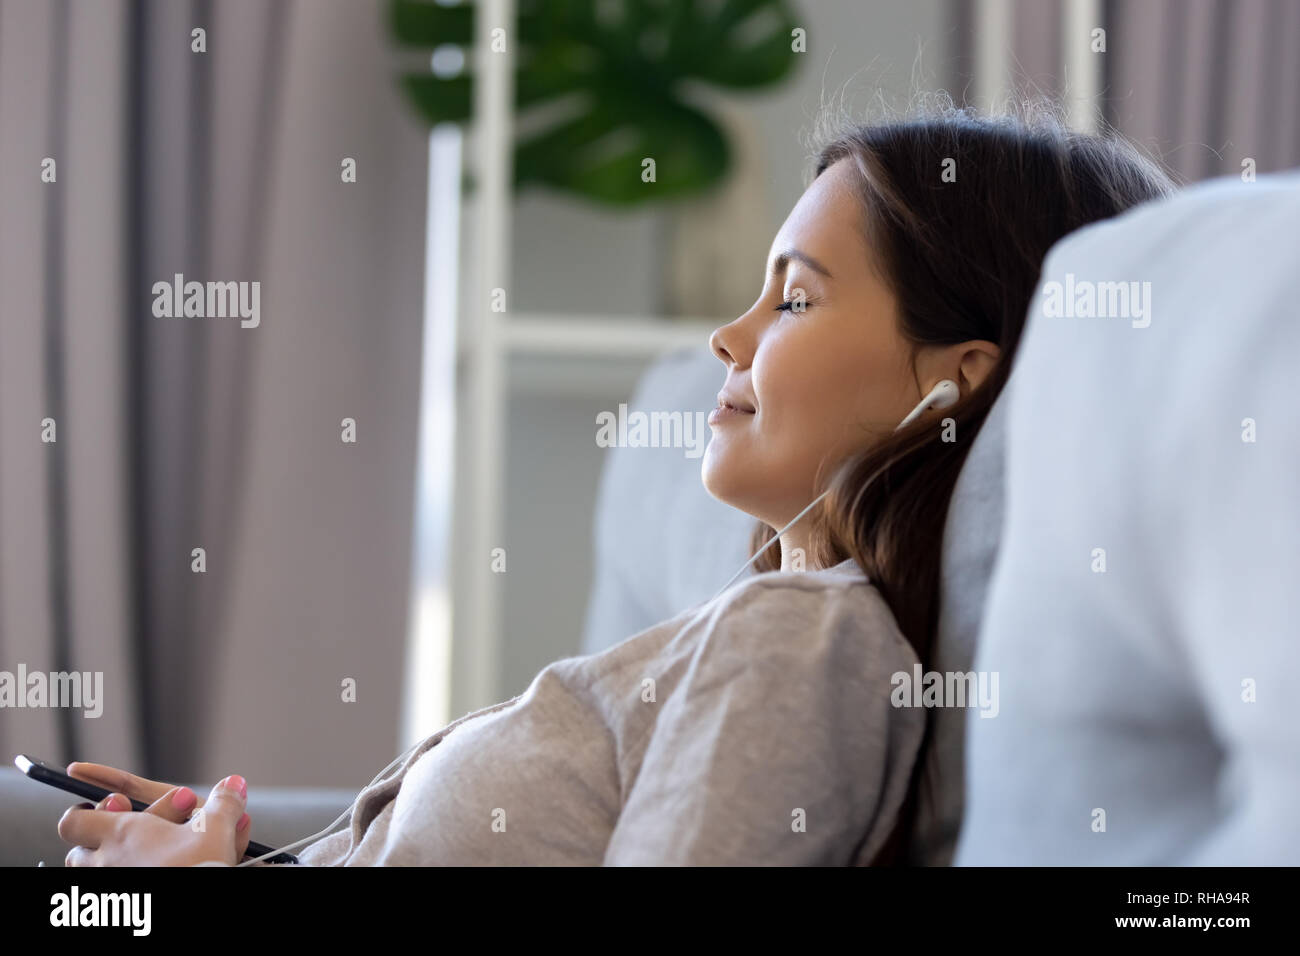 Young woman wearing earphones listening music sur smartphone app player Banque D'Images